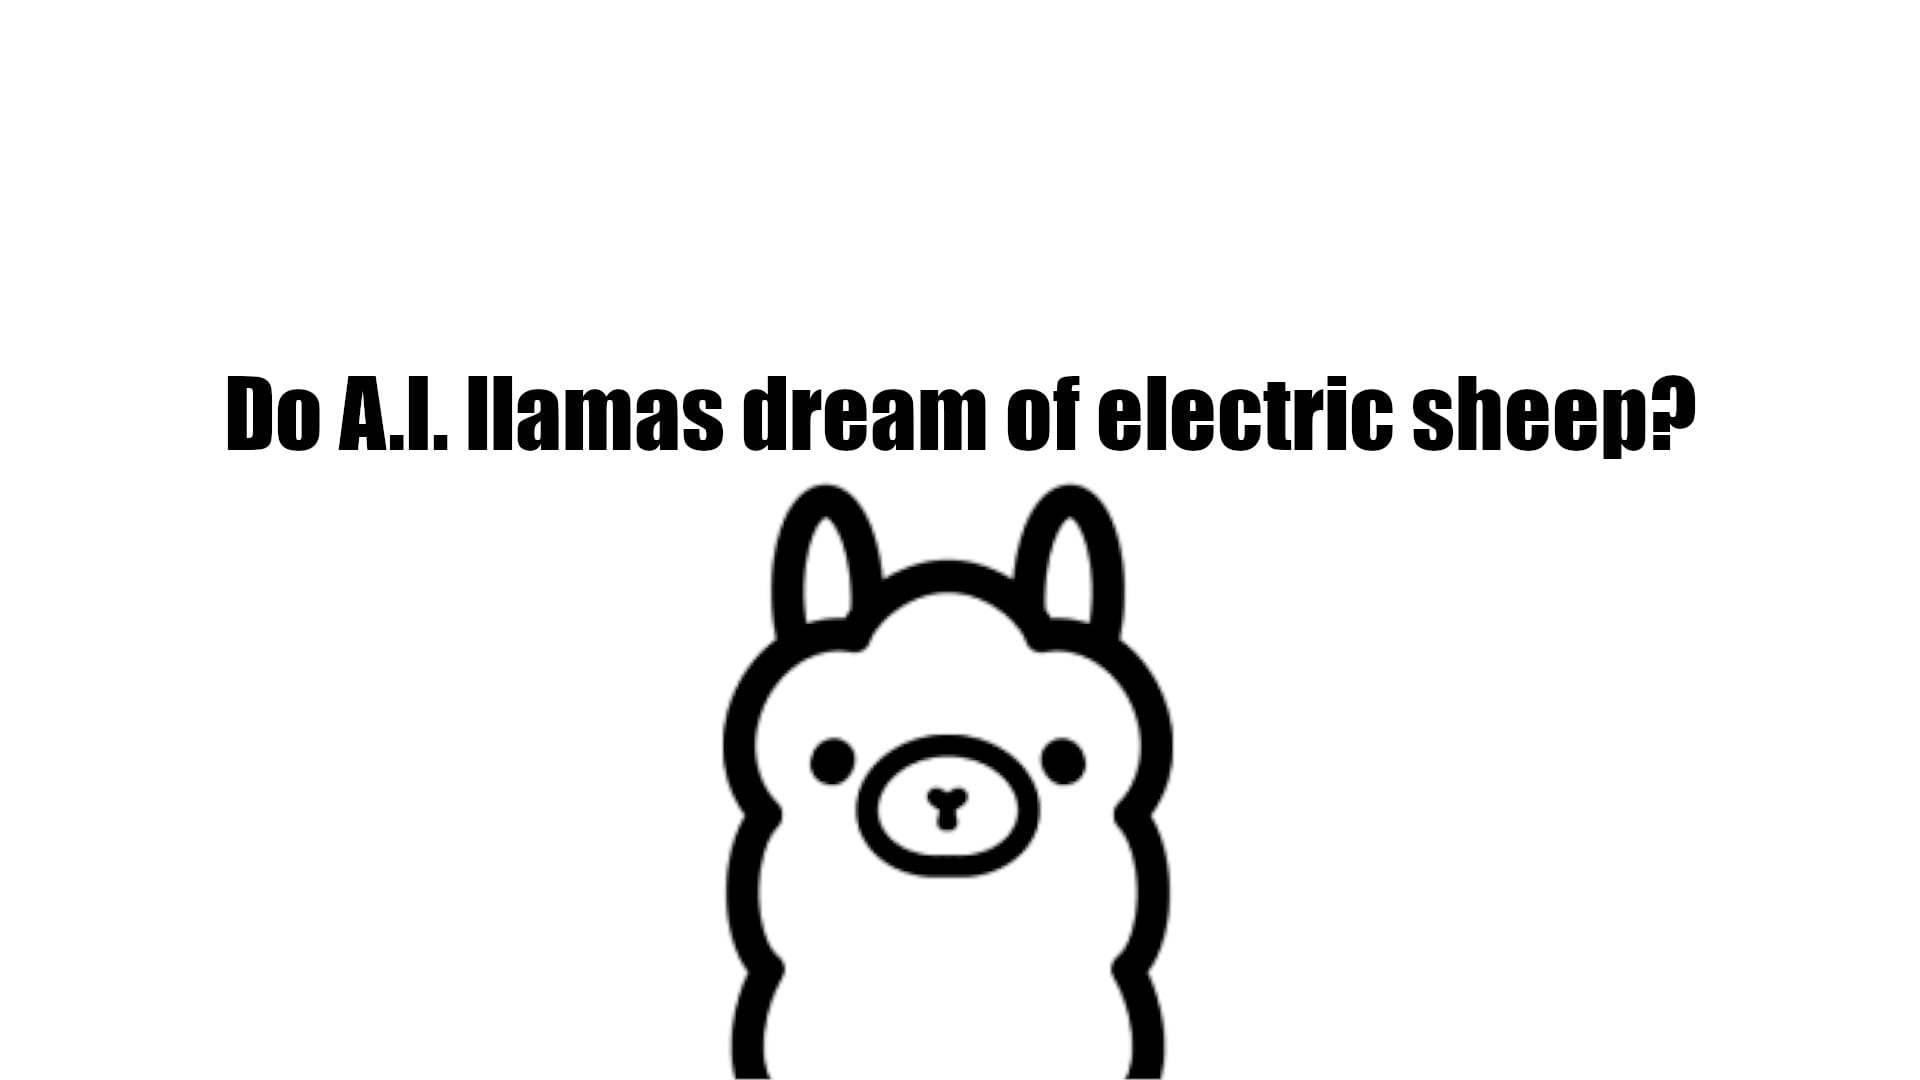 Install and use Ollama on your local machine